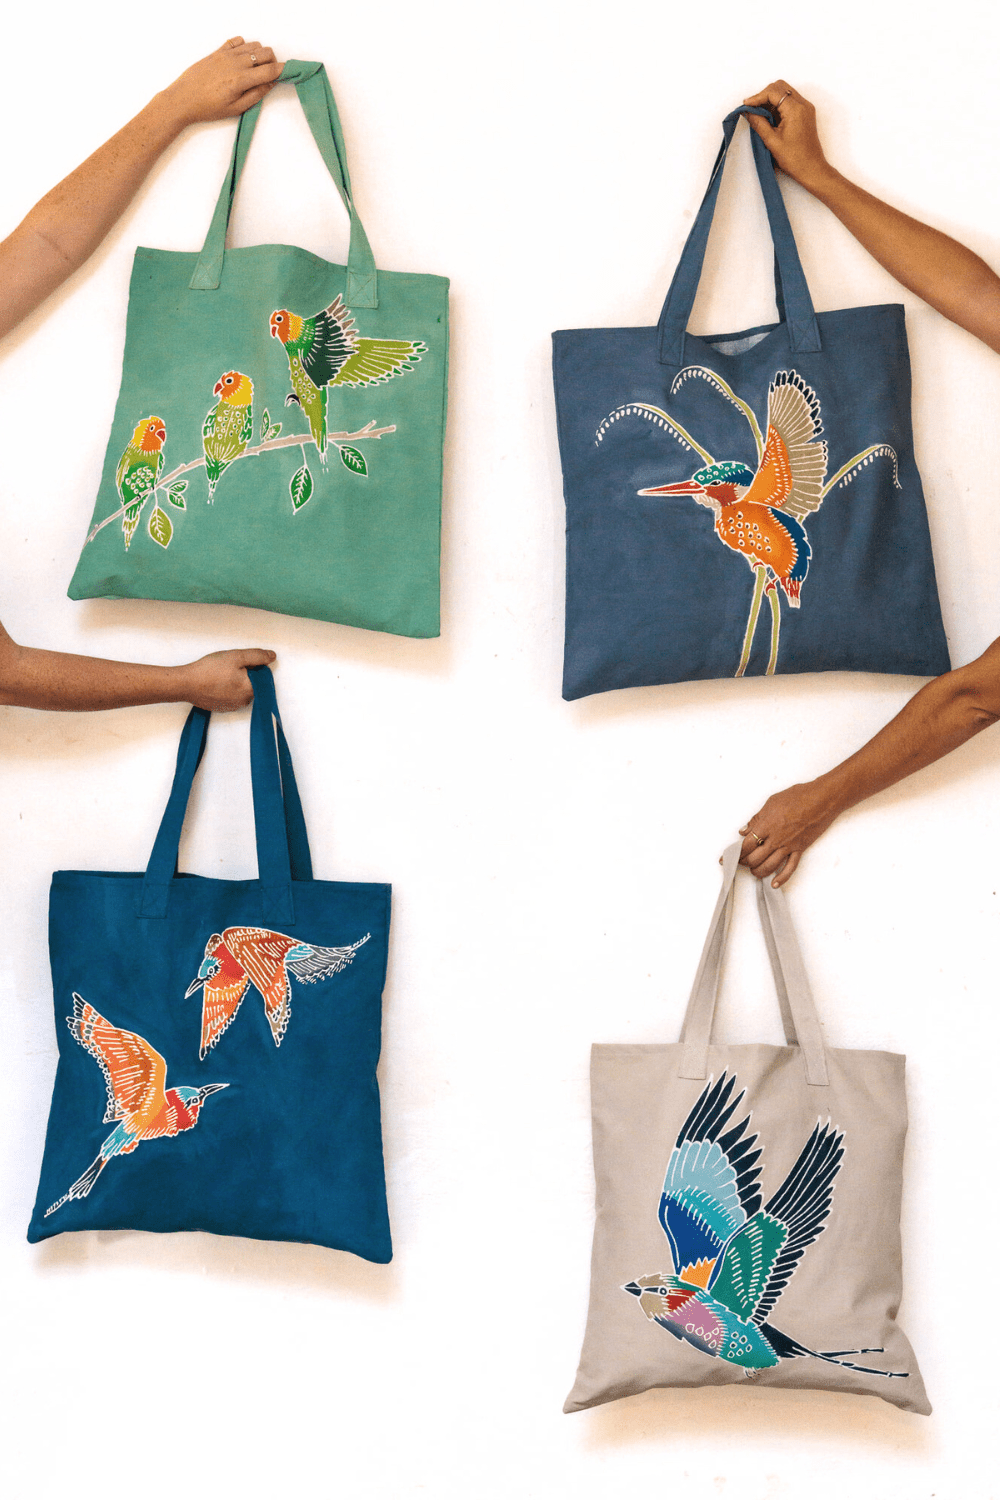 Papiko Lovebird Tote Bag - Handmade by TRIBAL TEXTILES - Handcrafted Home Decor Interiors - African Made